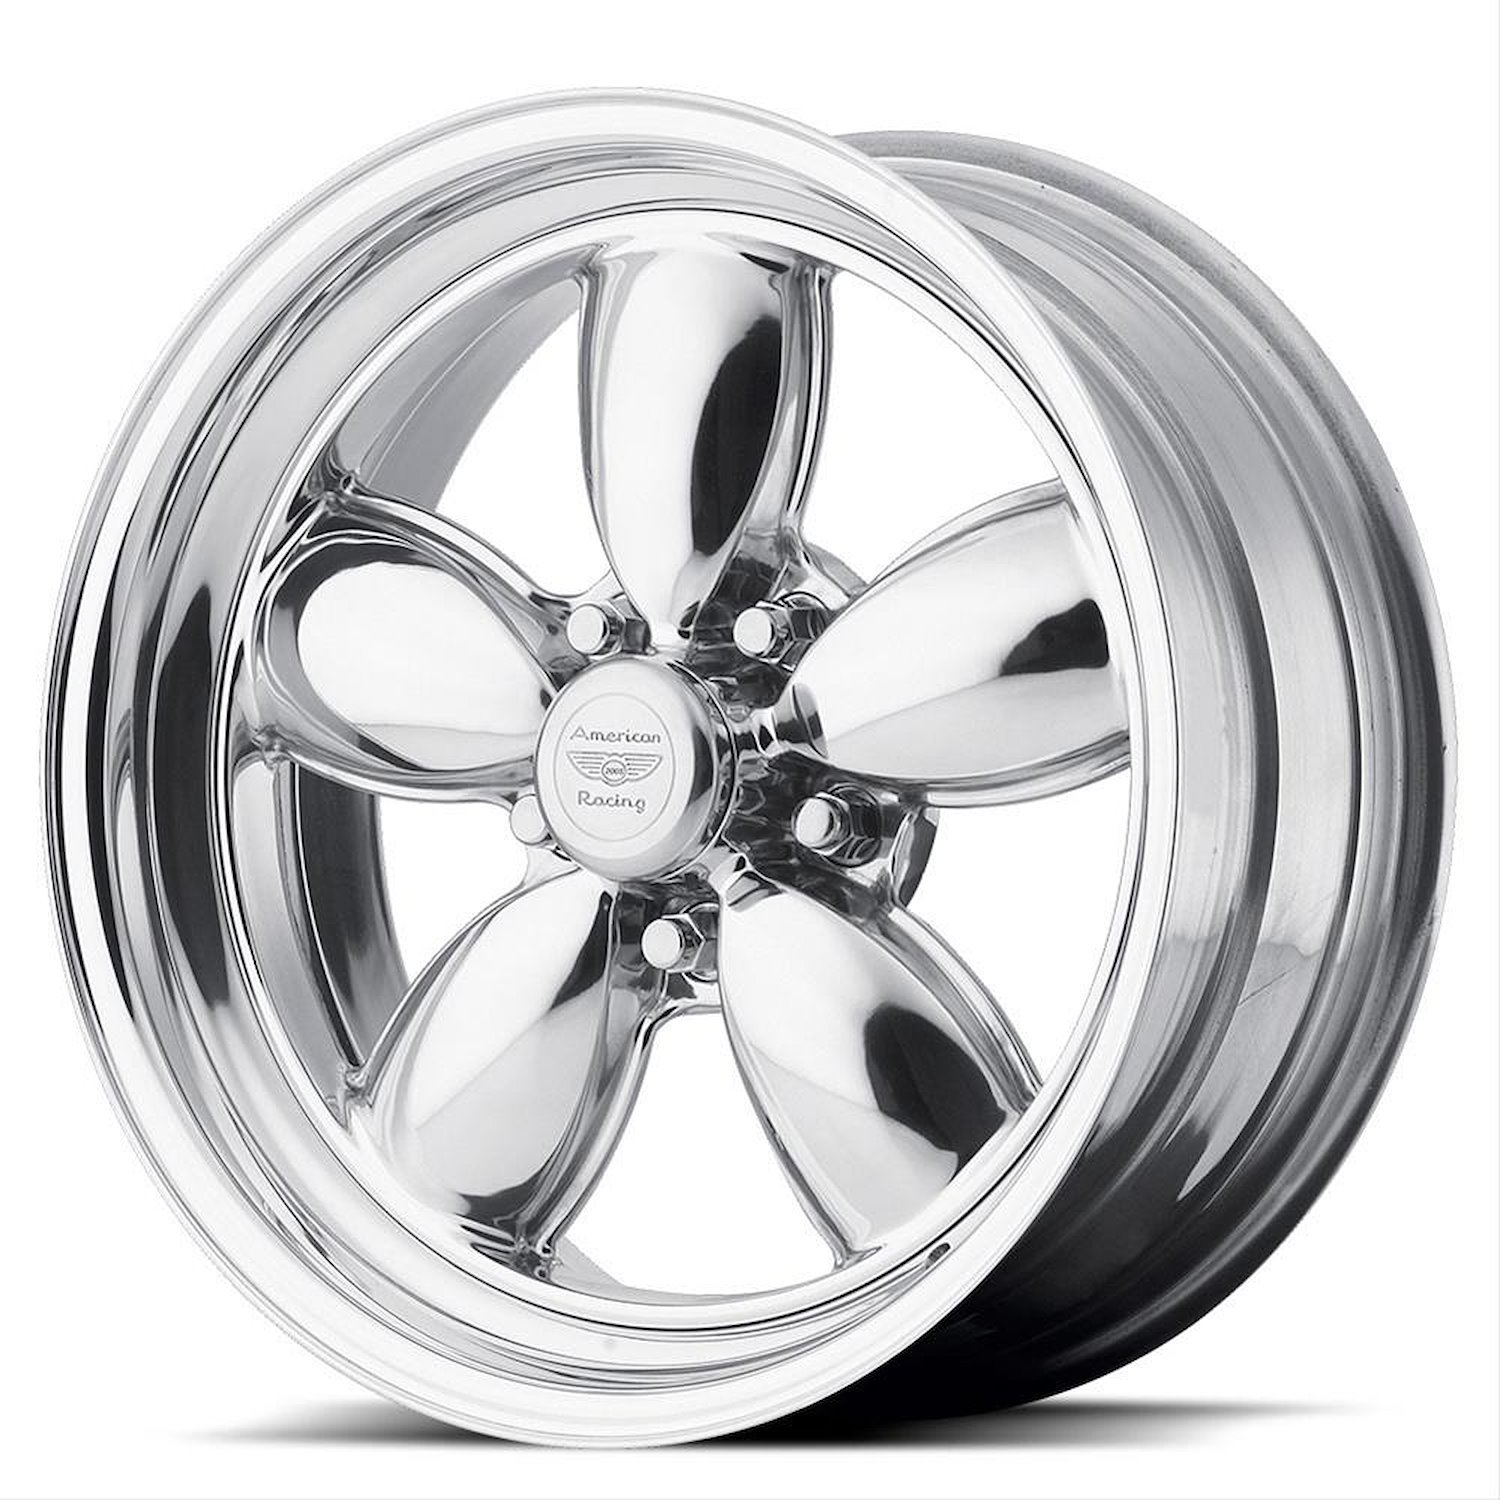 AMERICAN RACING CLASSIC 200S TWO-PIECE POLISHED 15 x 10 5x4.5 13 6.01